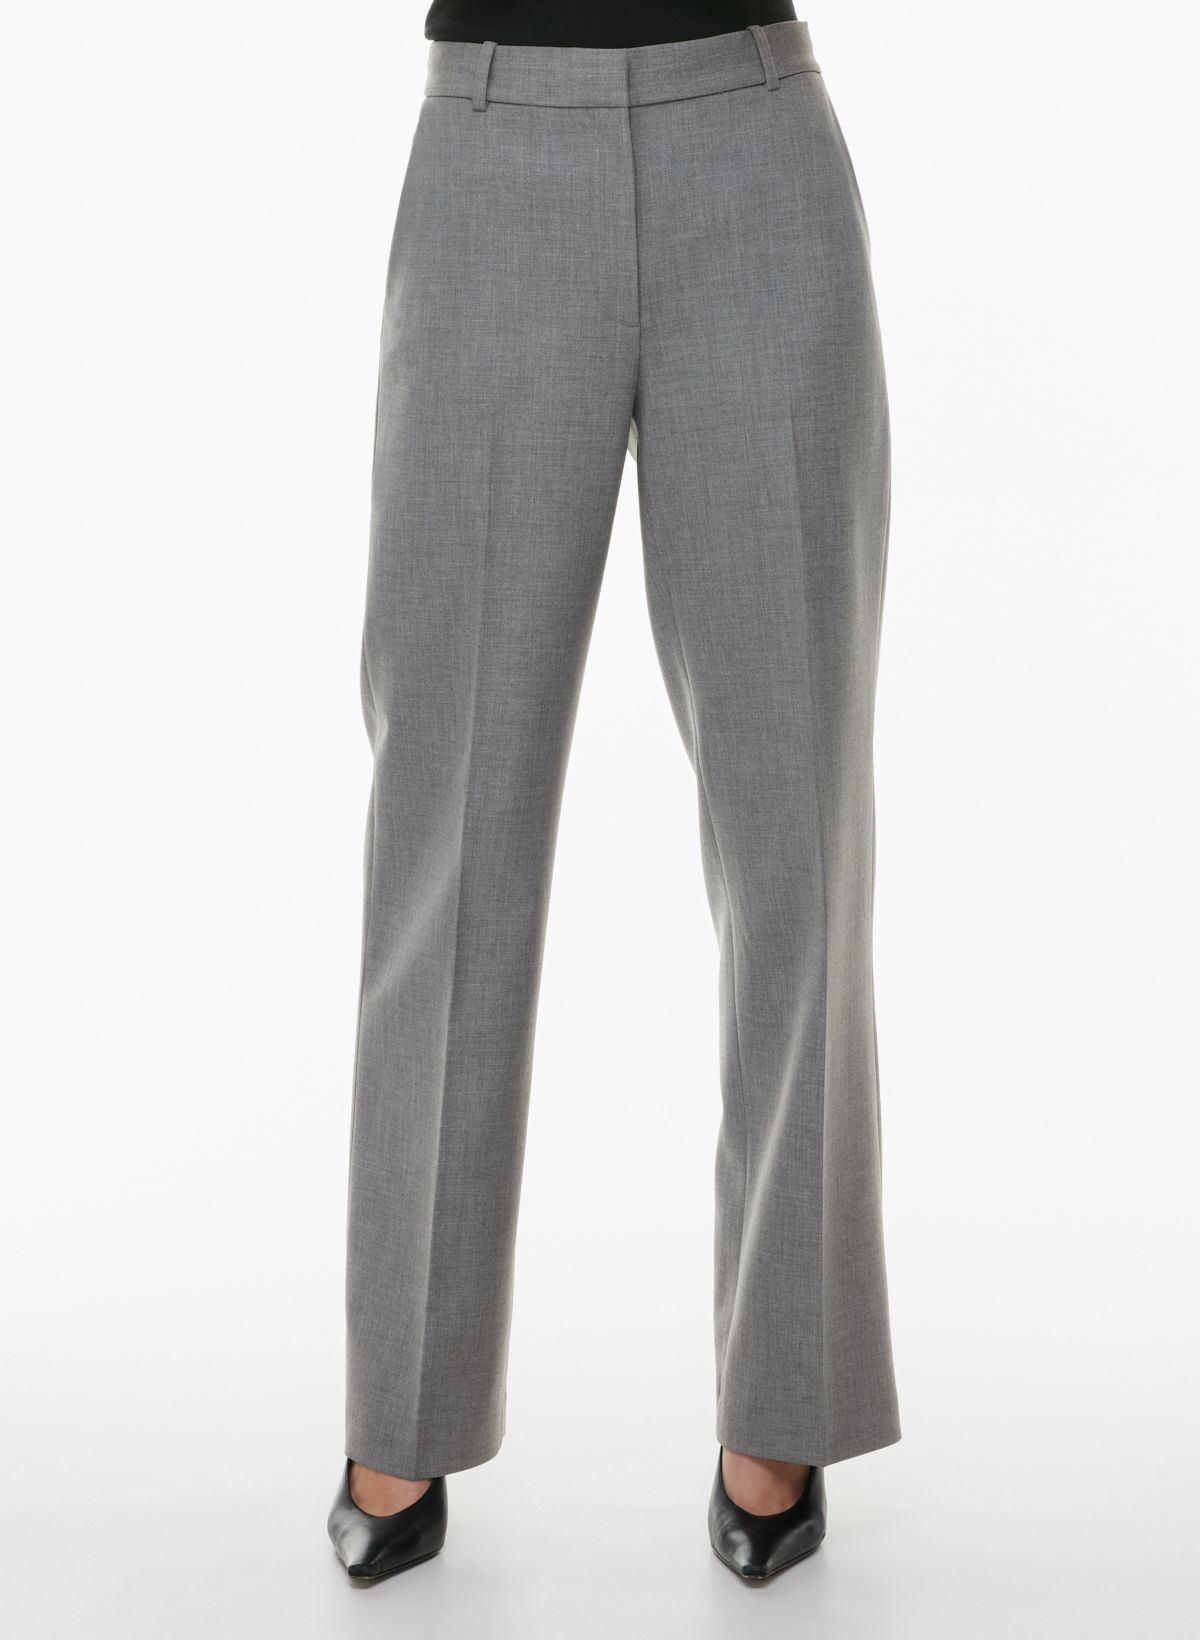 Agency Pant (New Ver.) + Effortless Pant (Regular) Are 5'3” Friendly! :  r/Aritzia